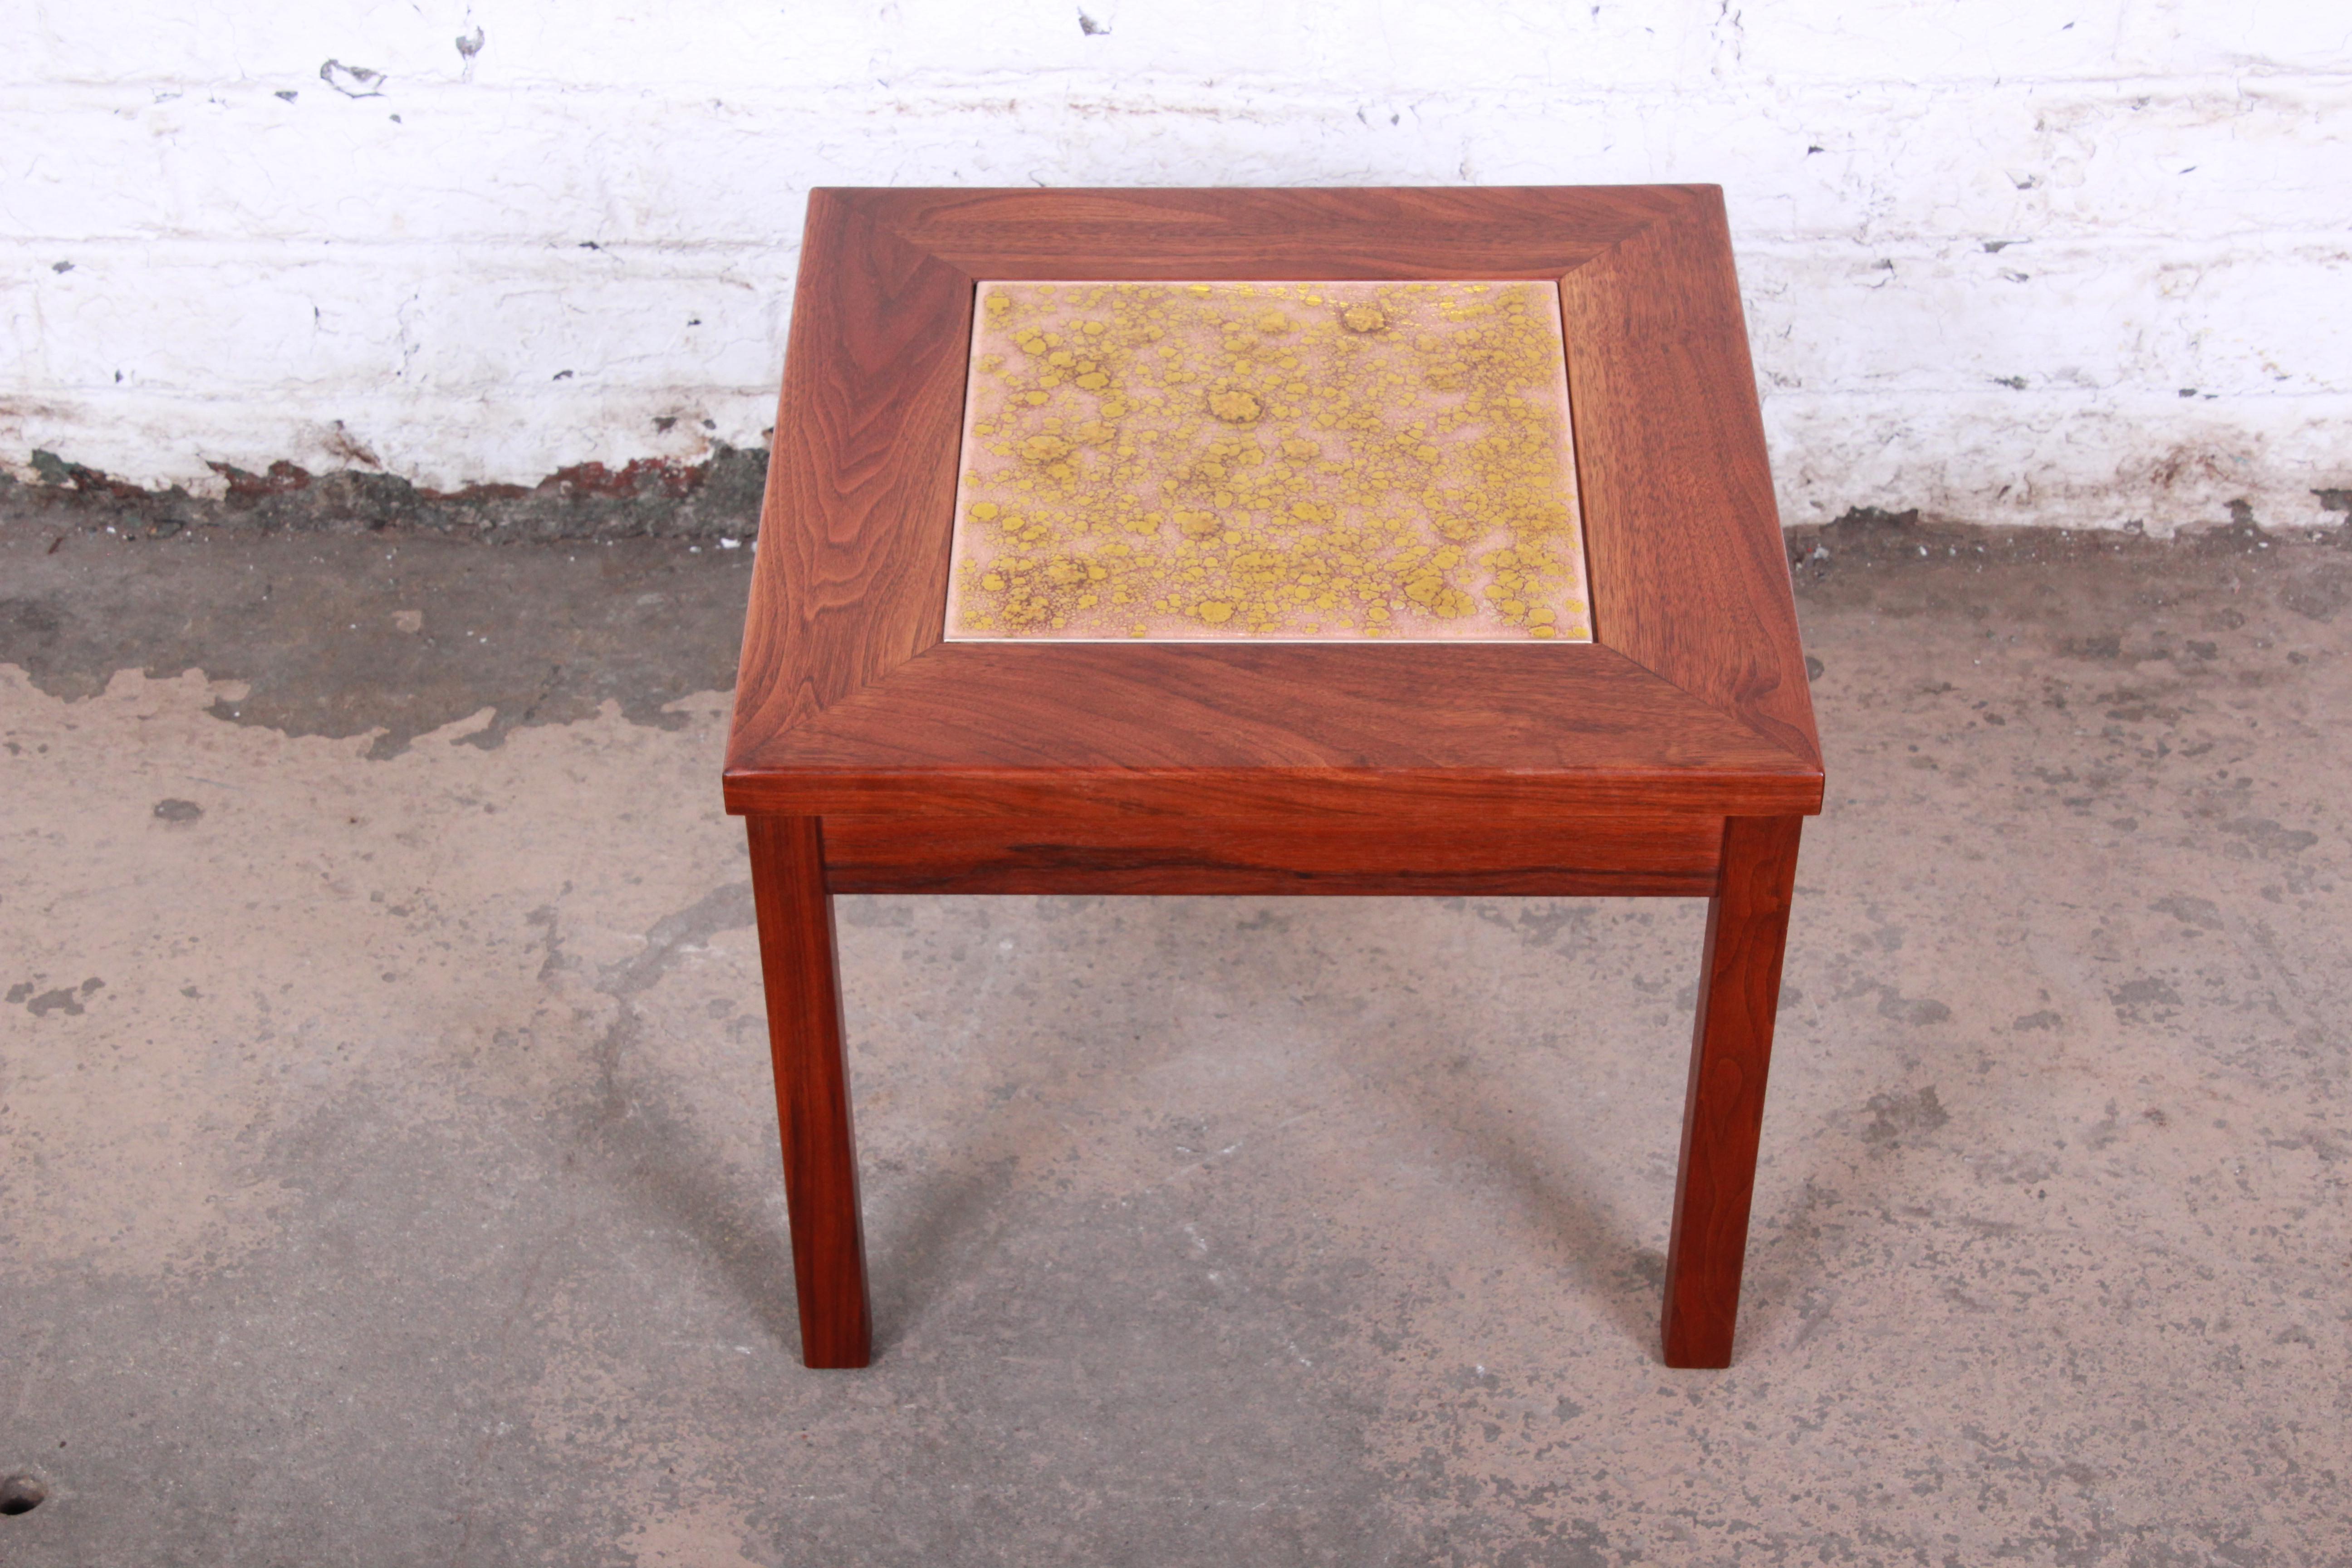 An exceptional Mid-Century Modern side table by John Keal for Brown Saltman of California. The table features gorgeous walnut wood grain and a unique copper tile insert on top. The original label is present on the underside of the table. The table